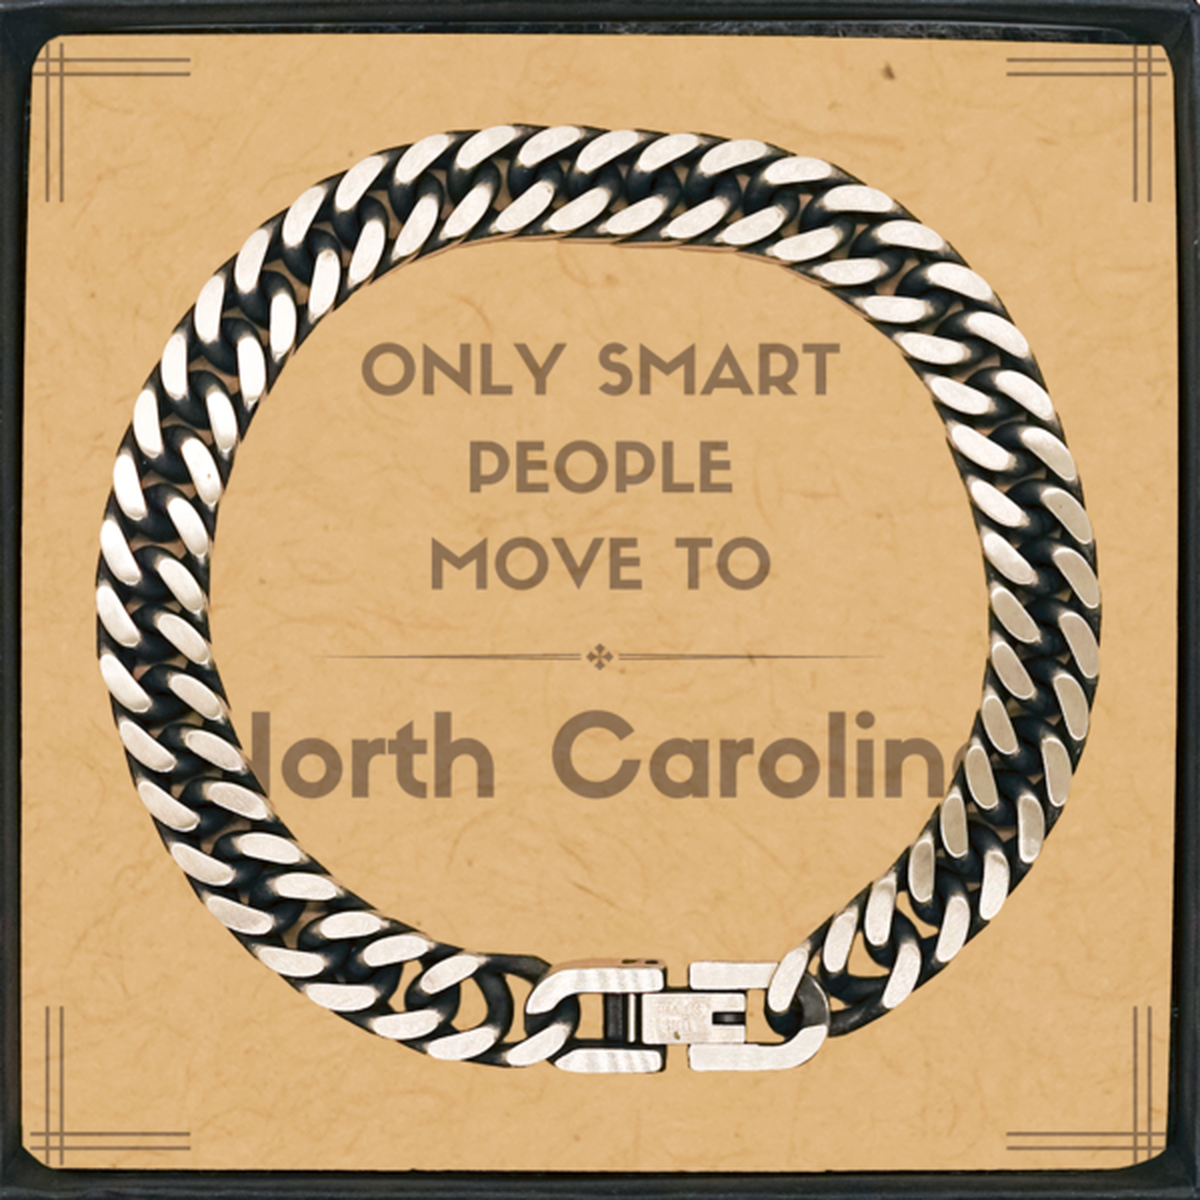 Only smart people move to North Carolina Cuban Link Chain Bracelet, Message Card Gifts For North Carolina, Move to North Carolina Gifts for Friends Coworker Funny Saying Quote